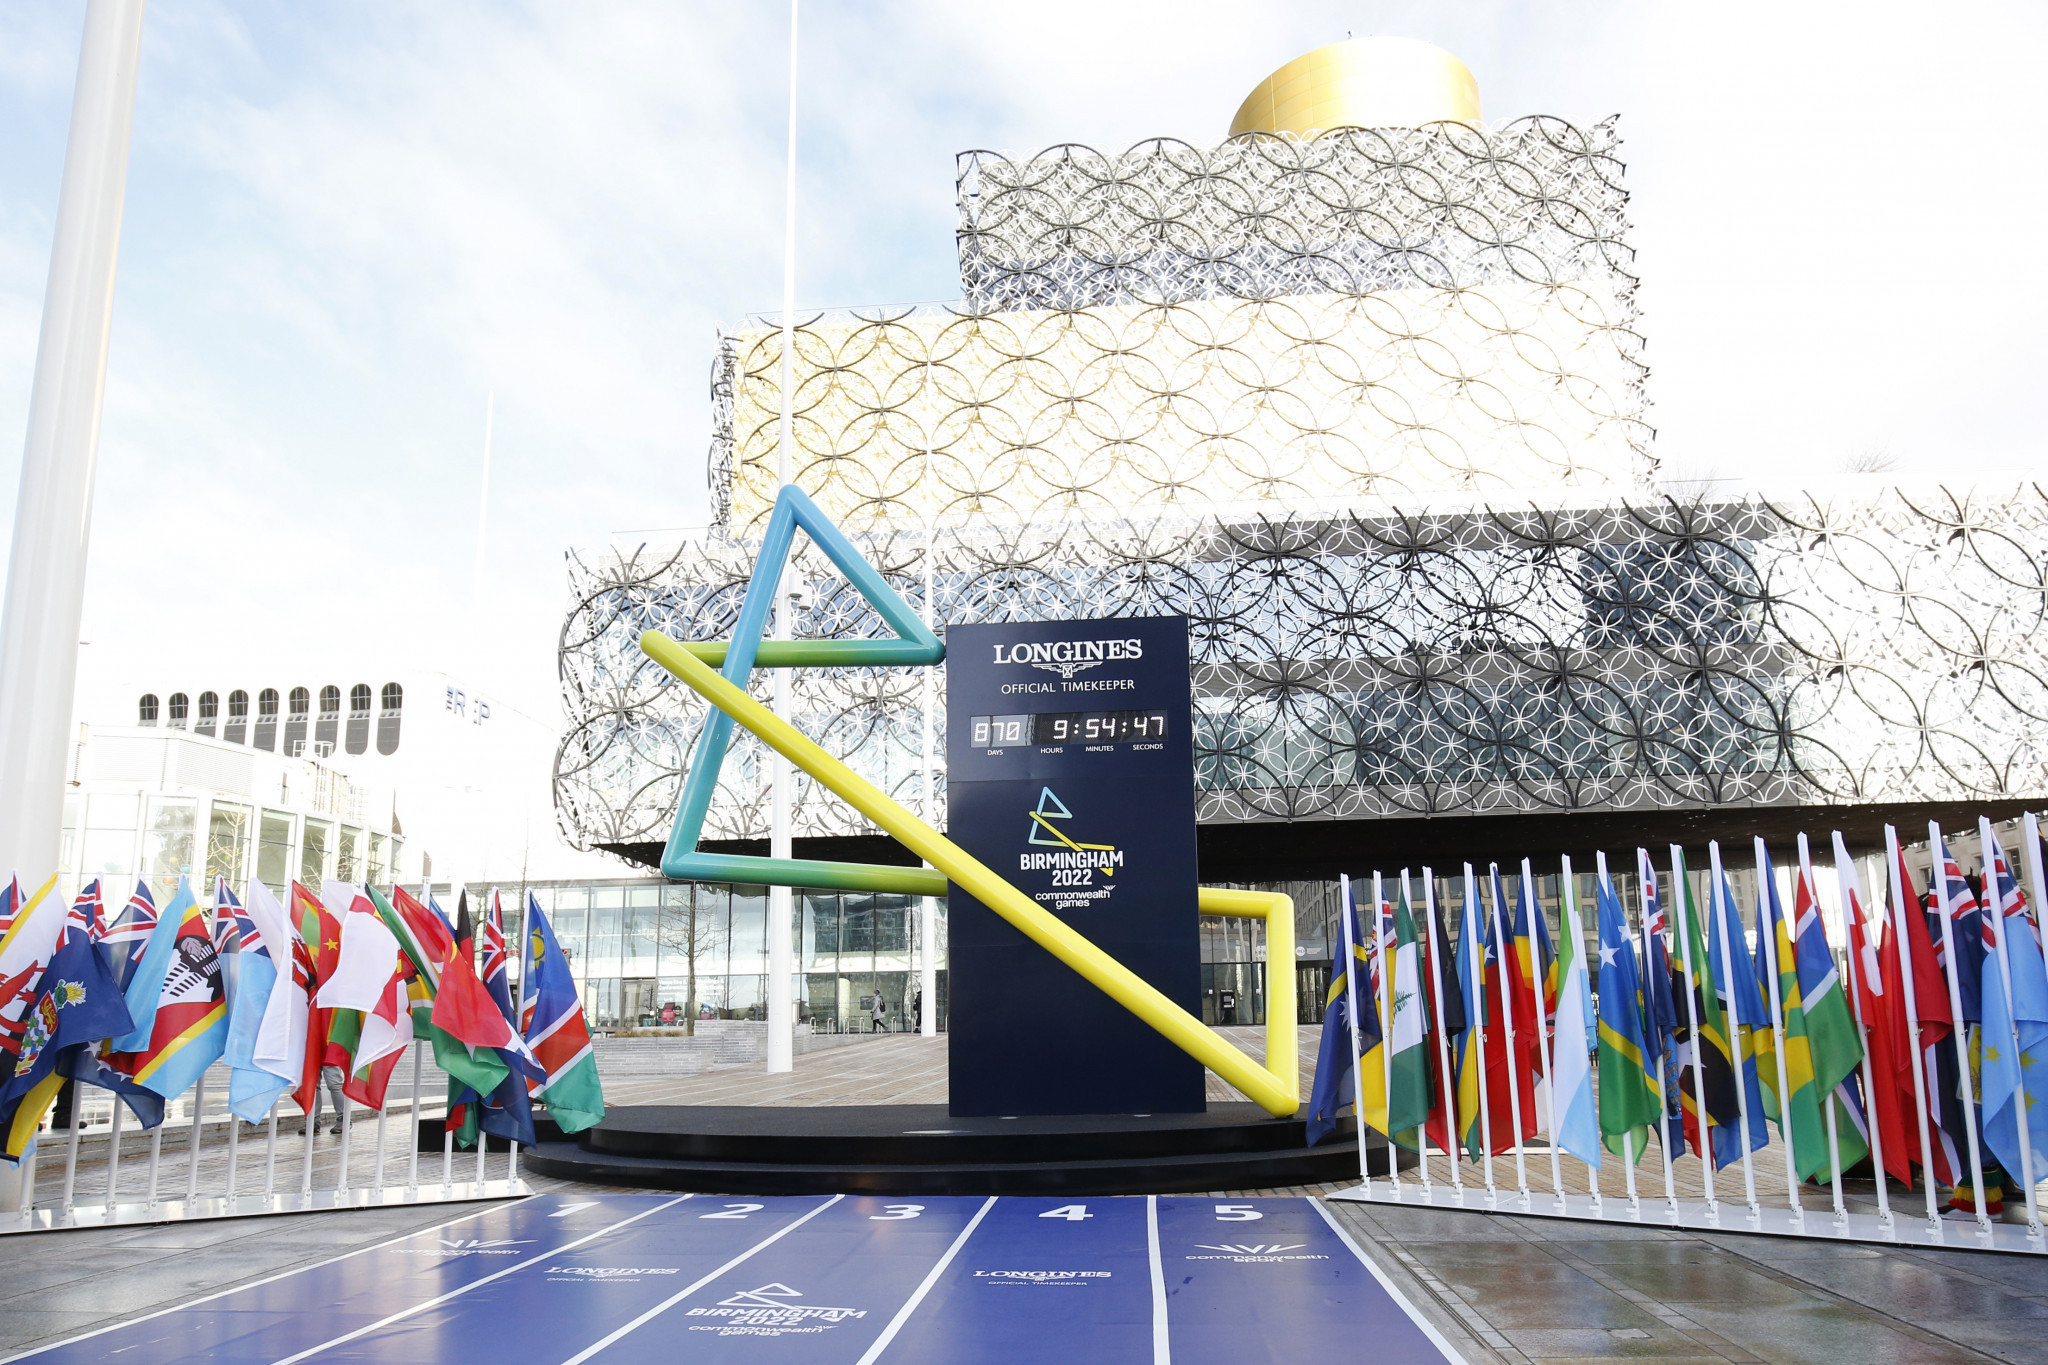 The Birmingham 2022 countdown clock had been based at Centenary Square since March 2020 ©Getty Images